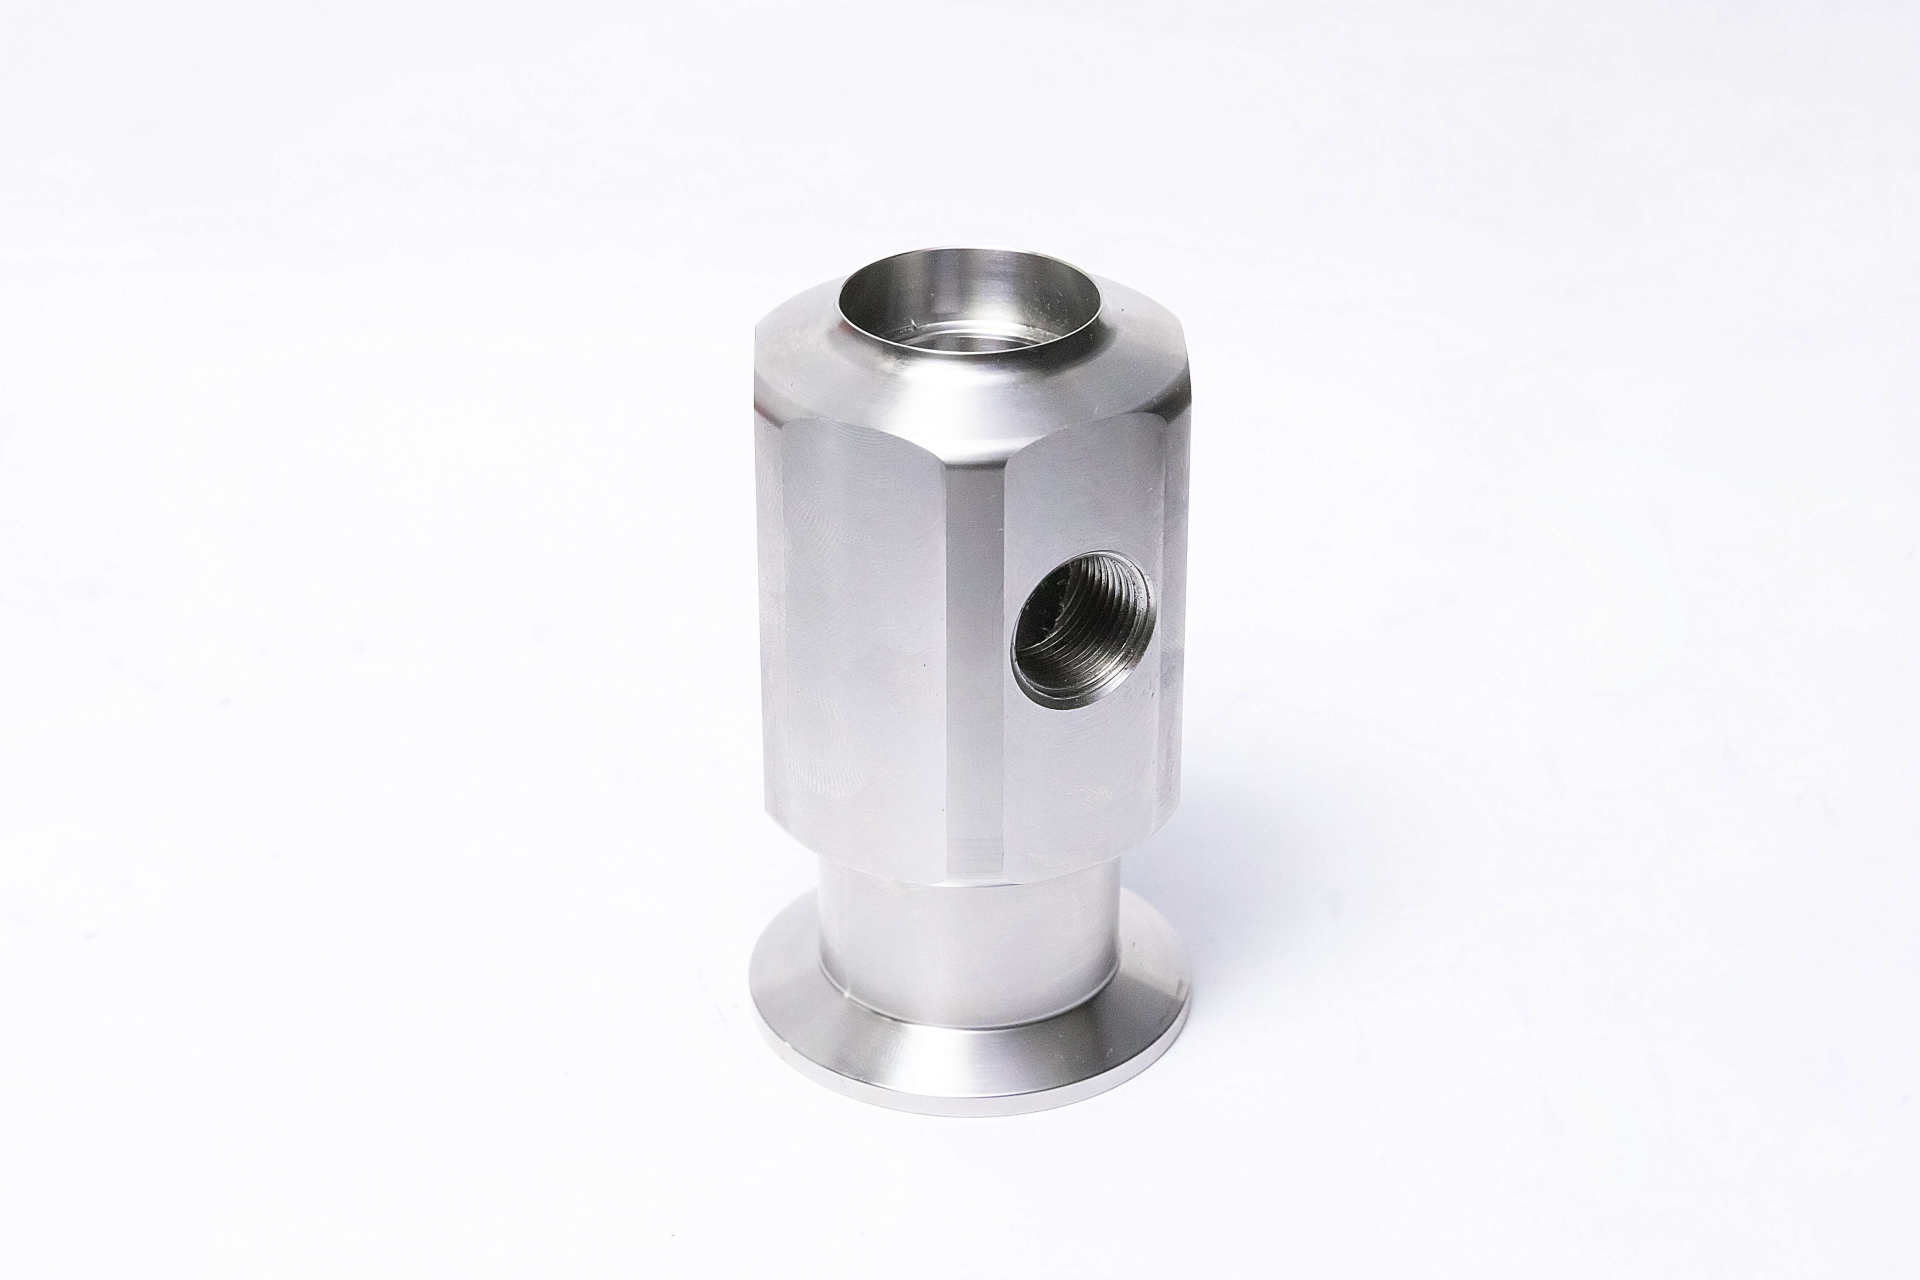 Parts manufactured by CNC turning